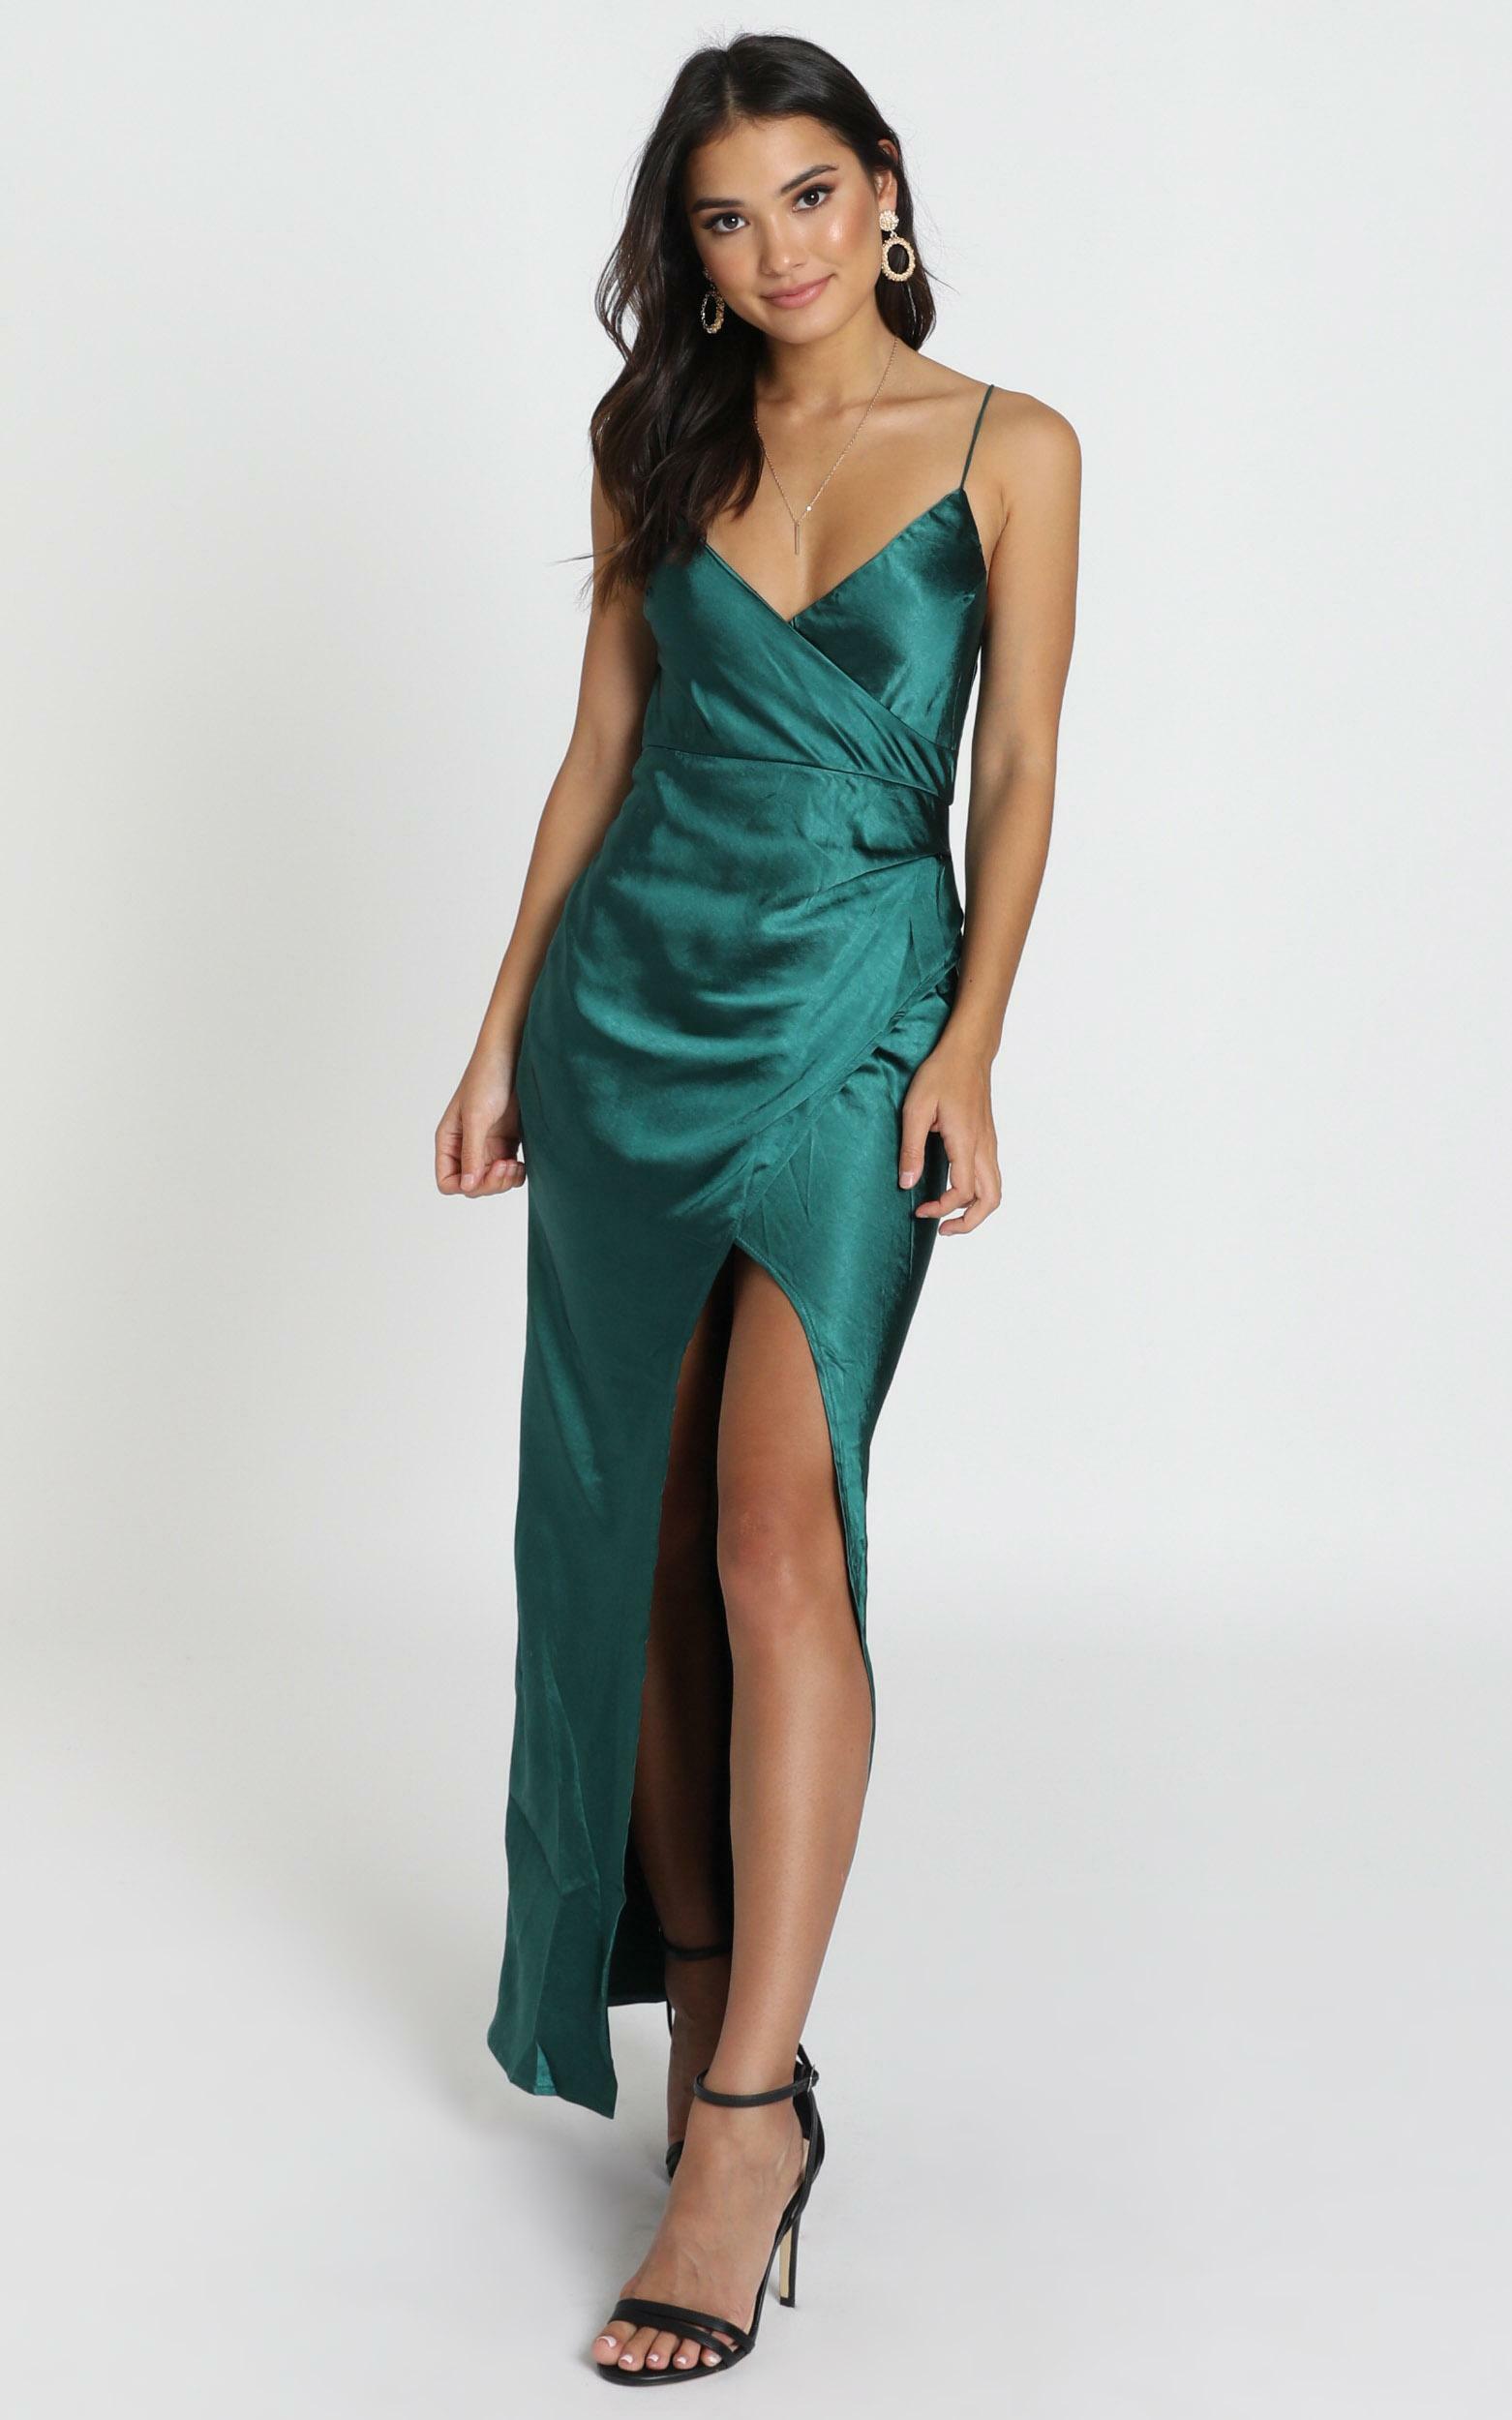 teal satin gown